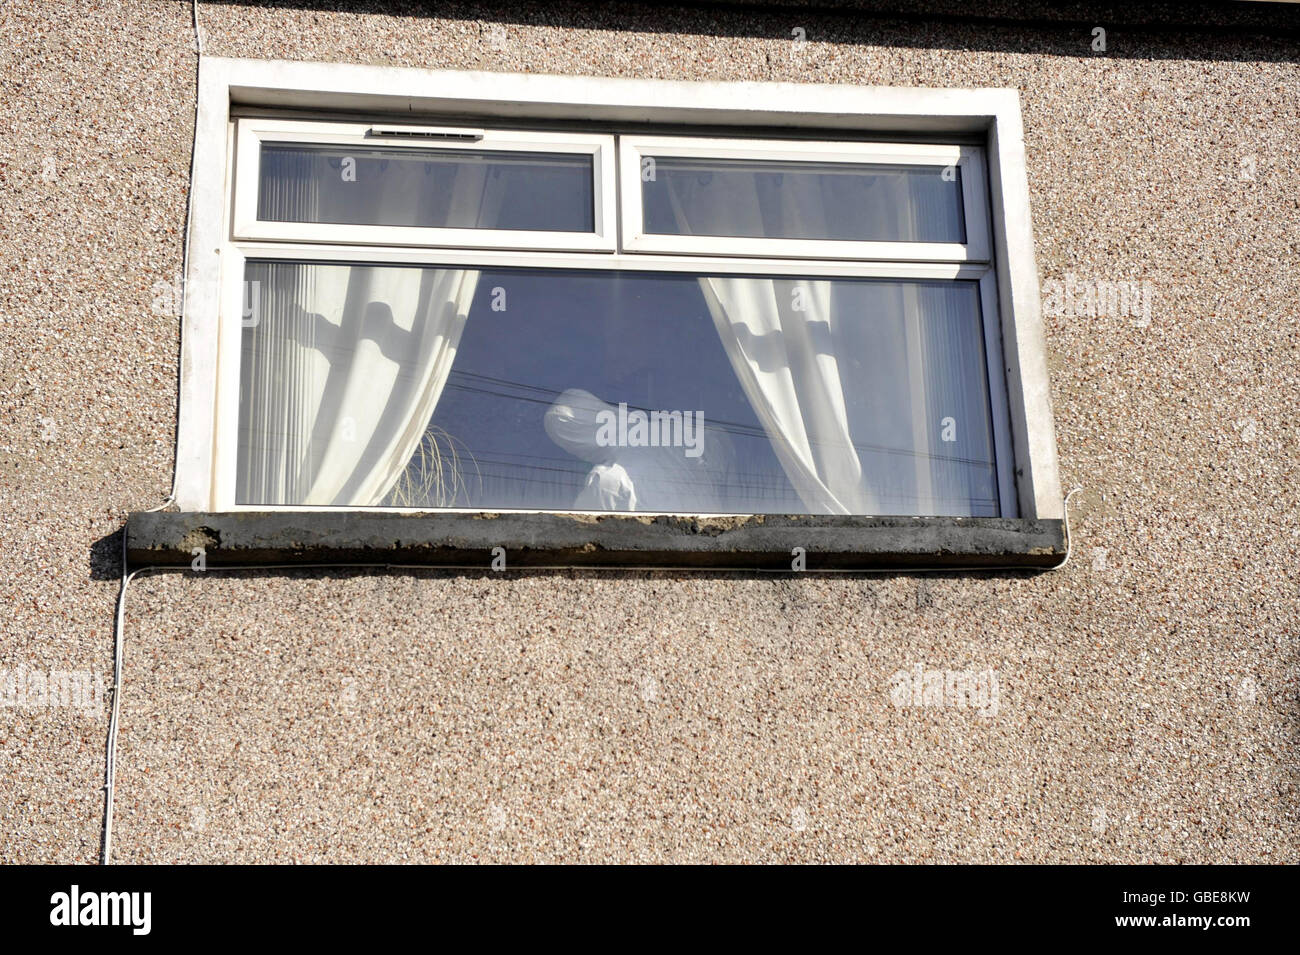 A Police forensics officer is seen through the window of a house on Commercial Street in Ystrad Mynach, Caerphilly, Wales, where a three-and-a-half-month-old baby boy was mauled to death by two family owned dogs around midnight last night. Stock Photo